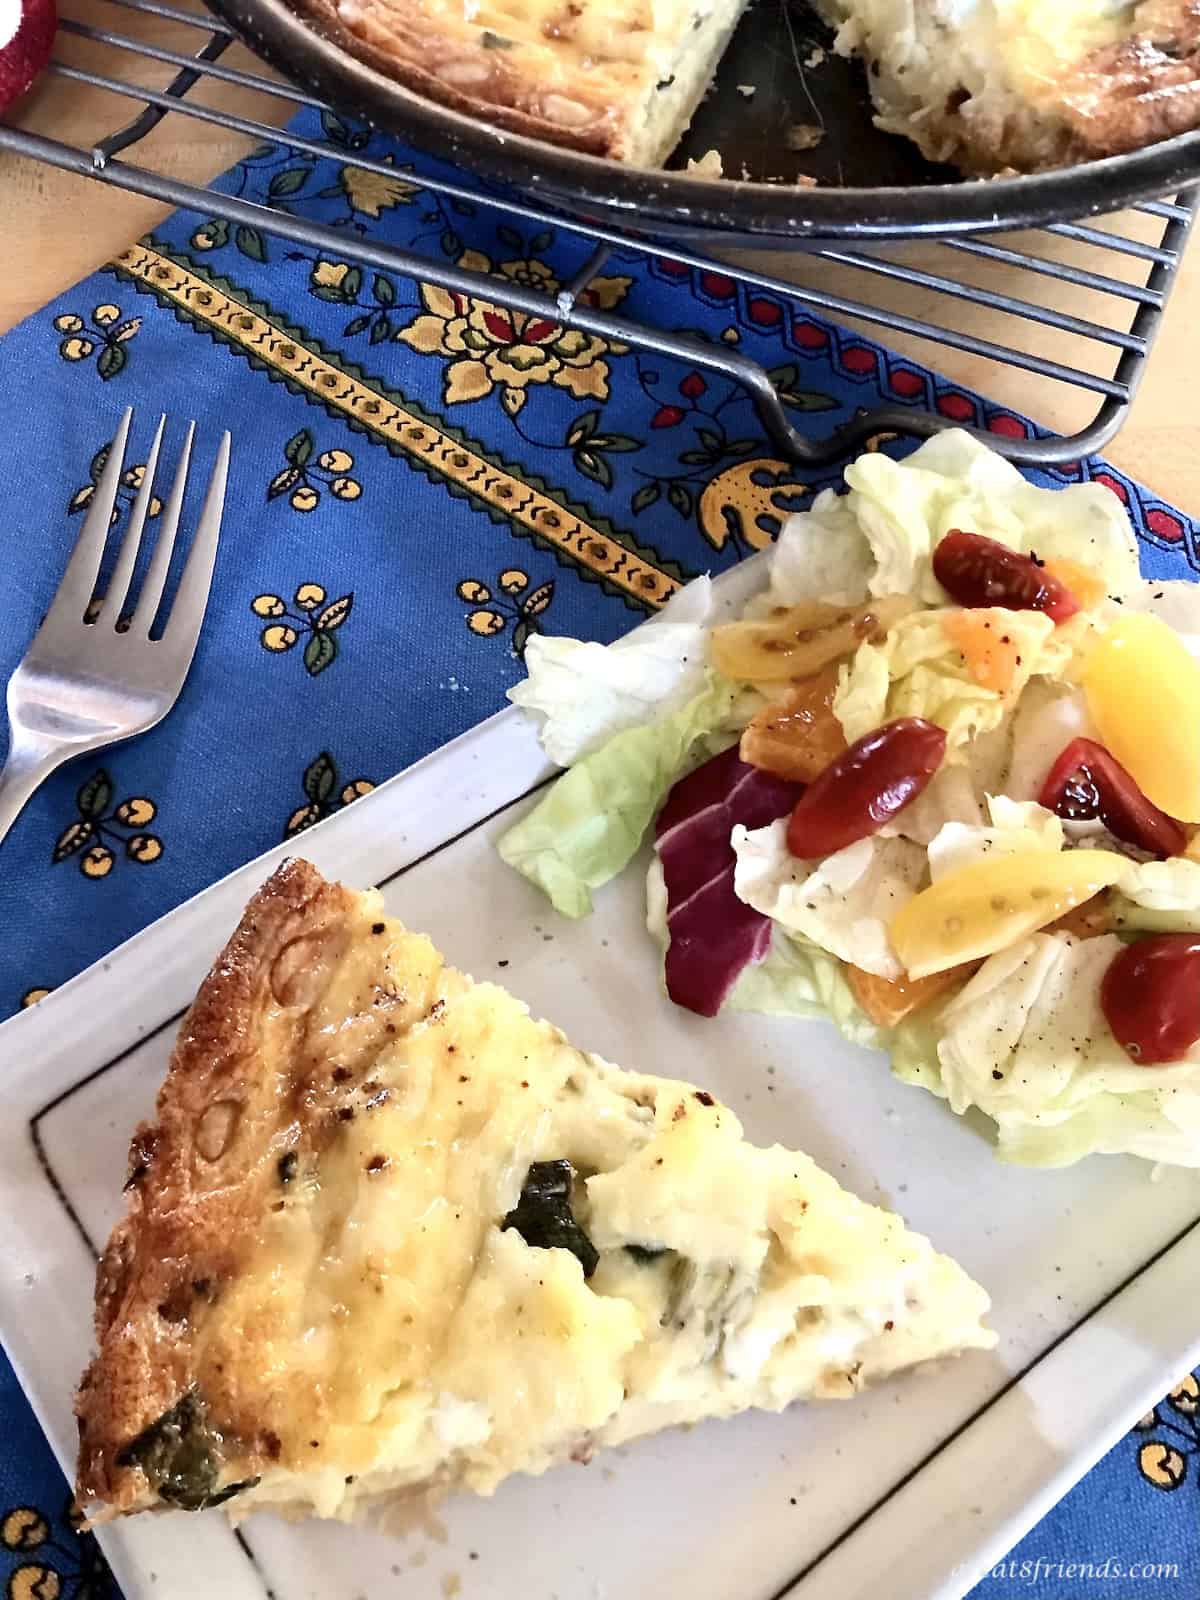 A slice of quiche on a plate with a small side salad.